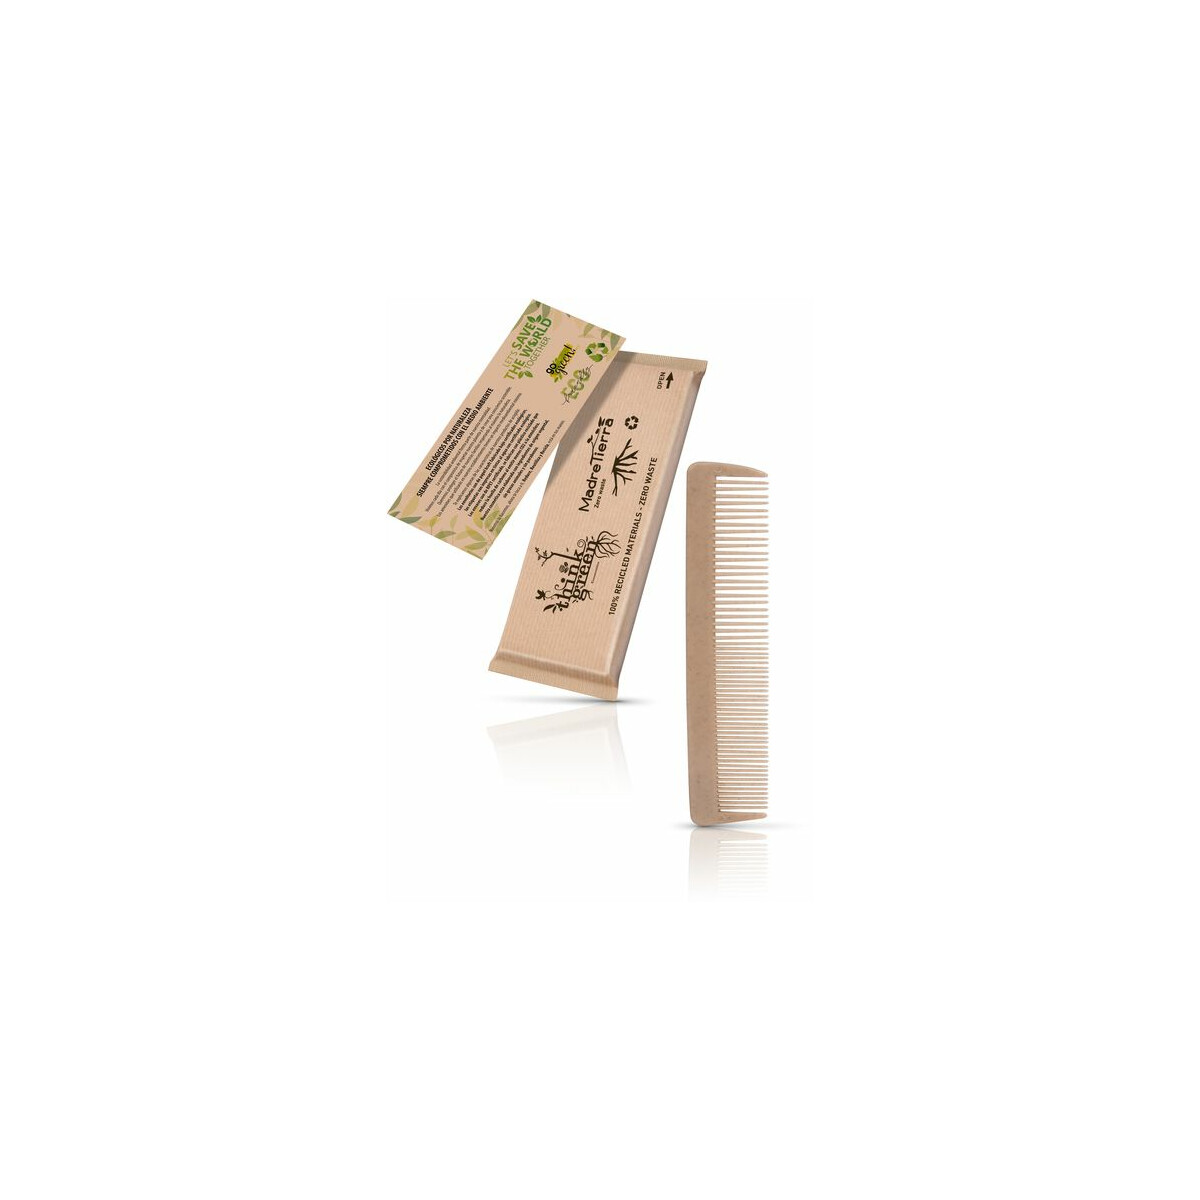 Organic comb - individually packaged